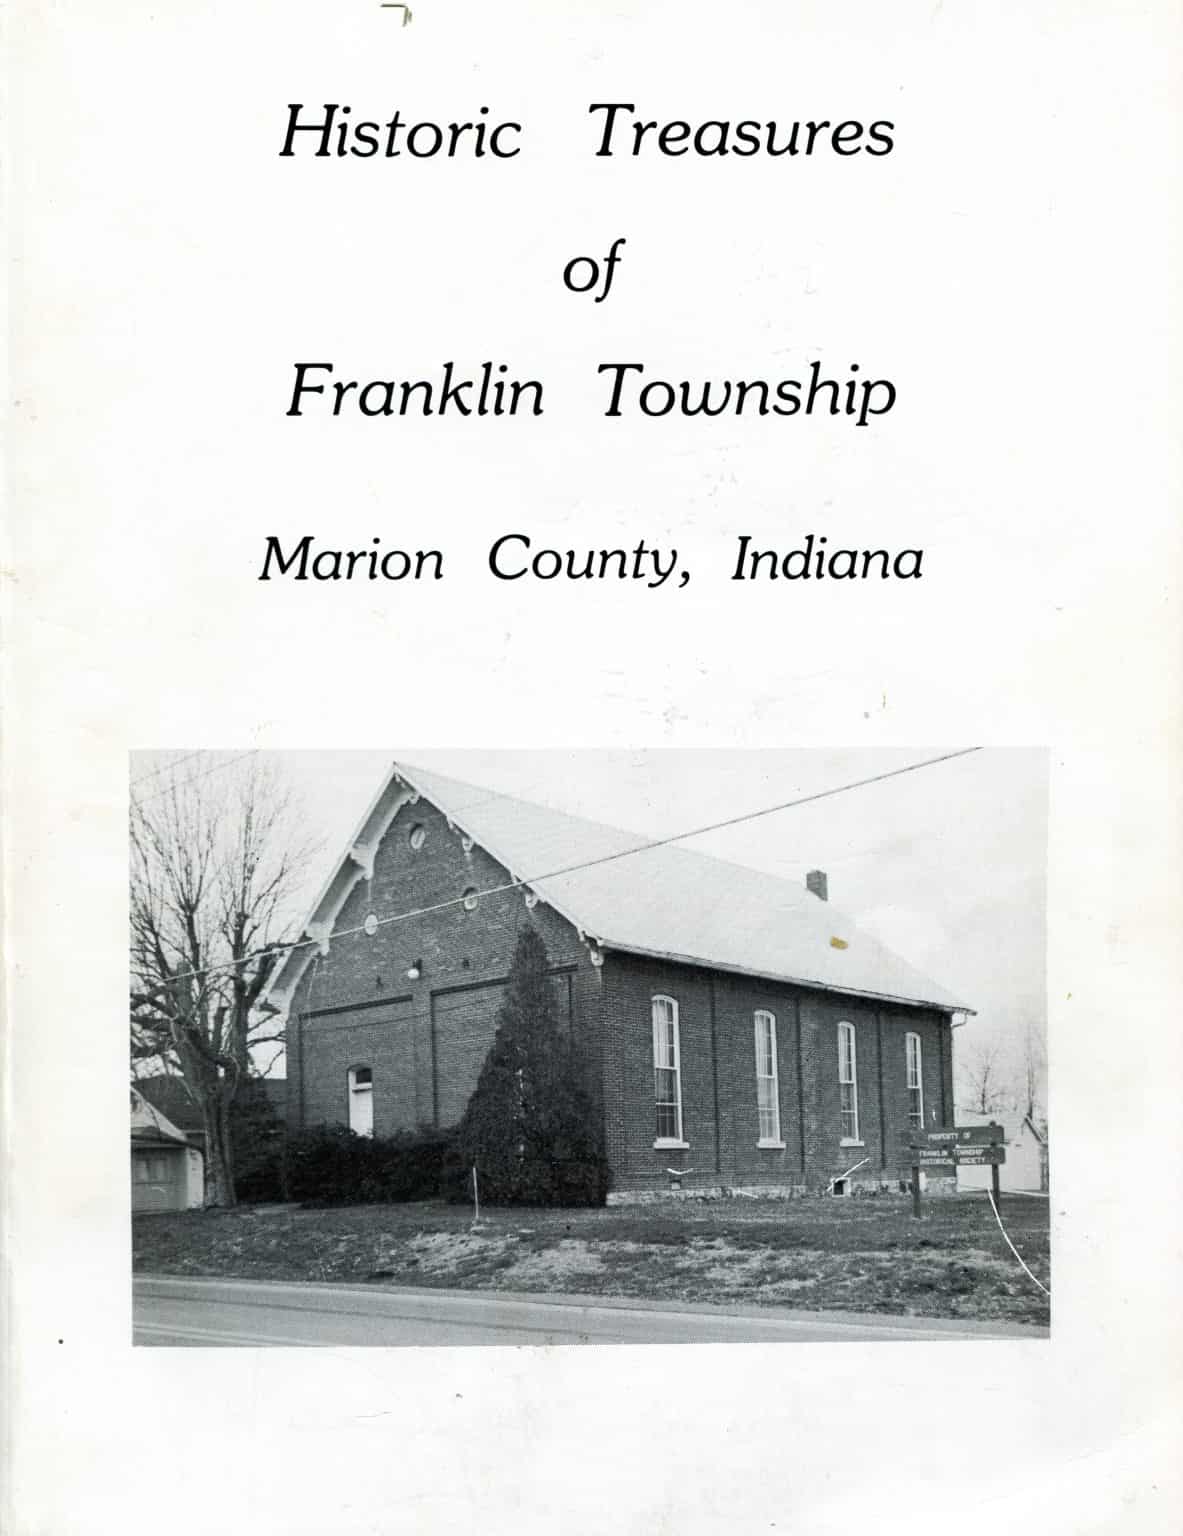 employment at franklin township indianapolis library